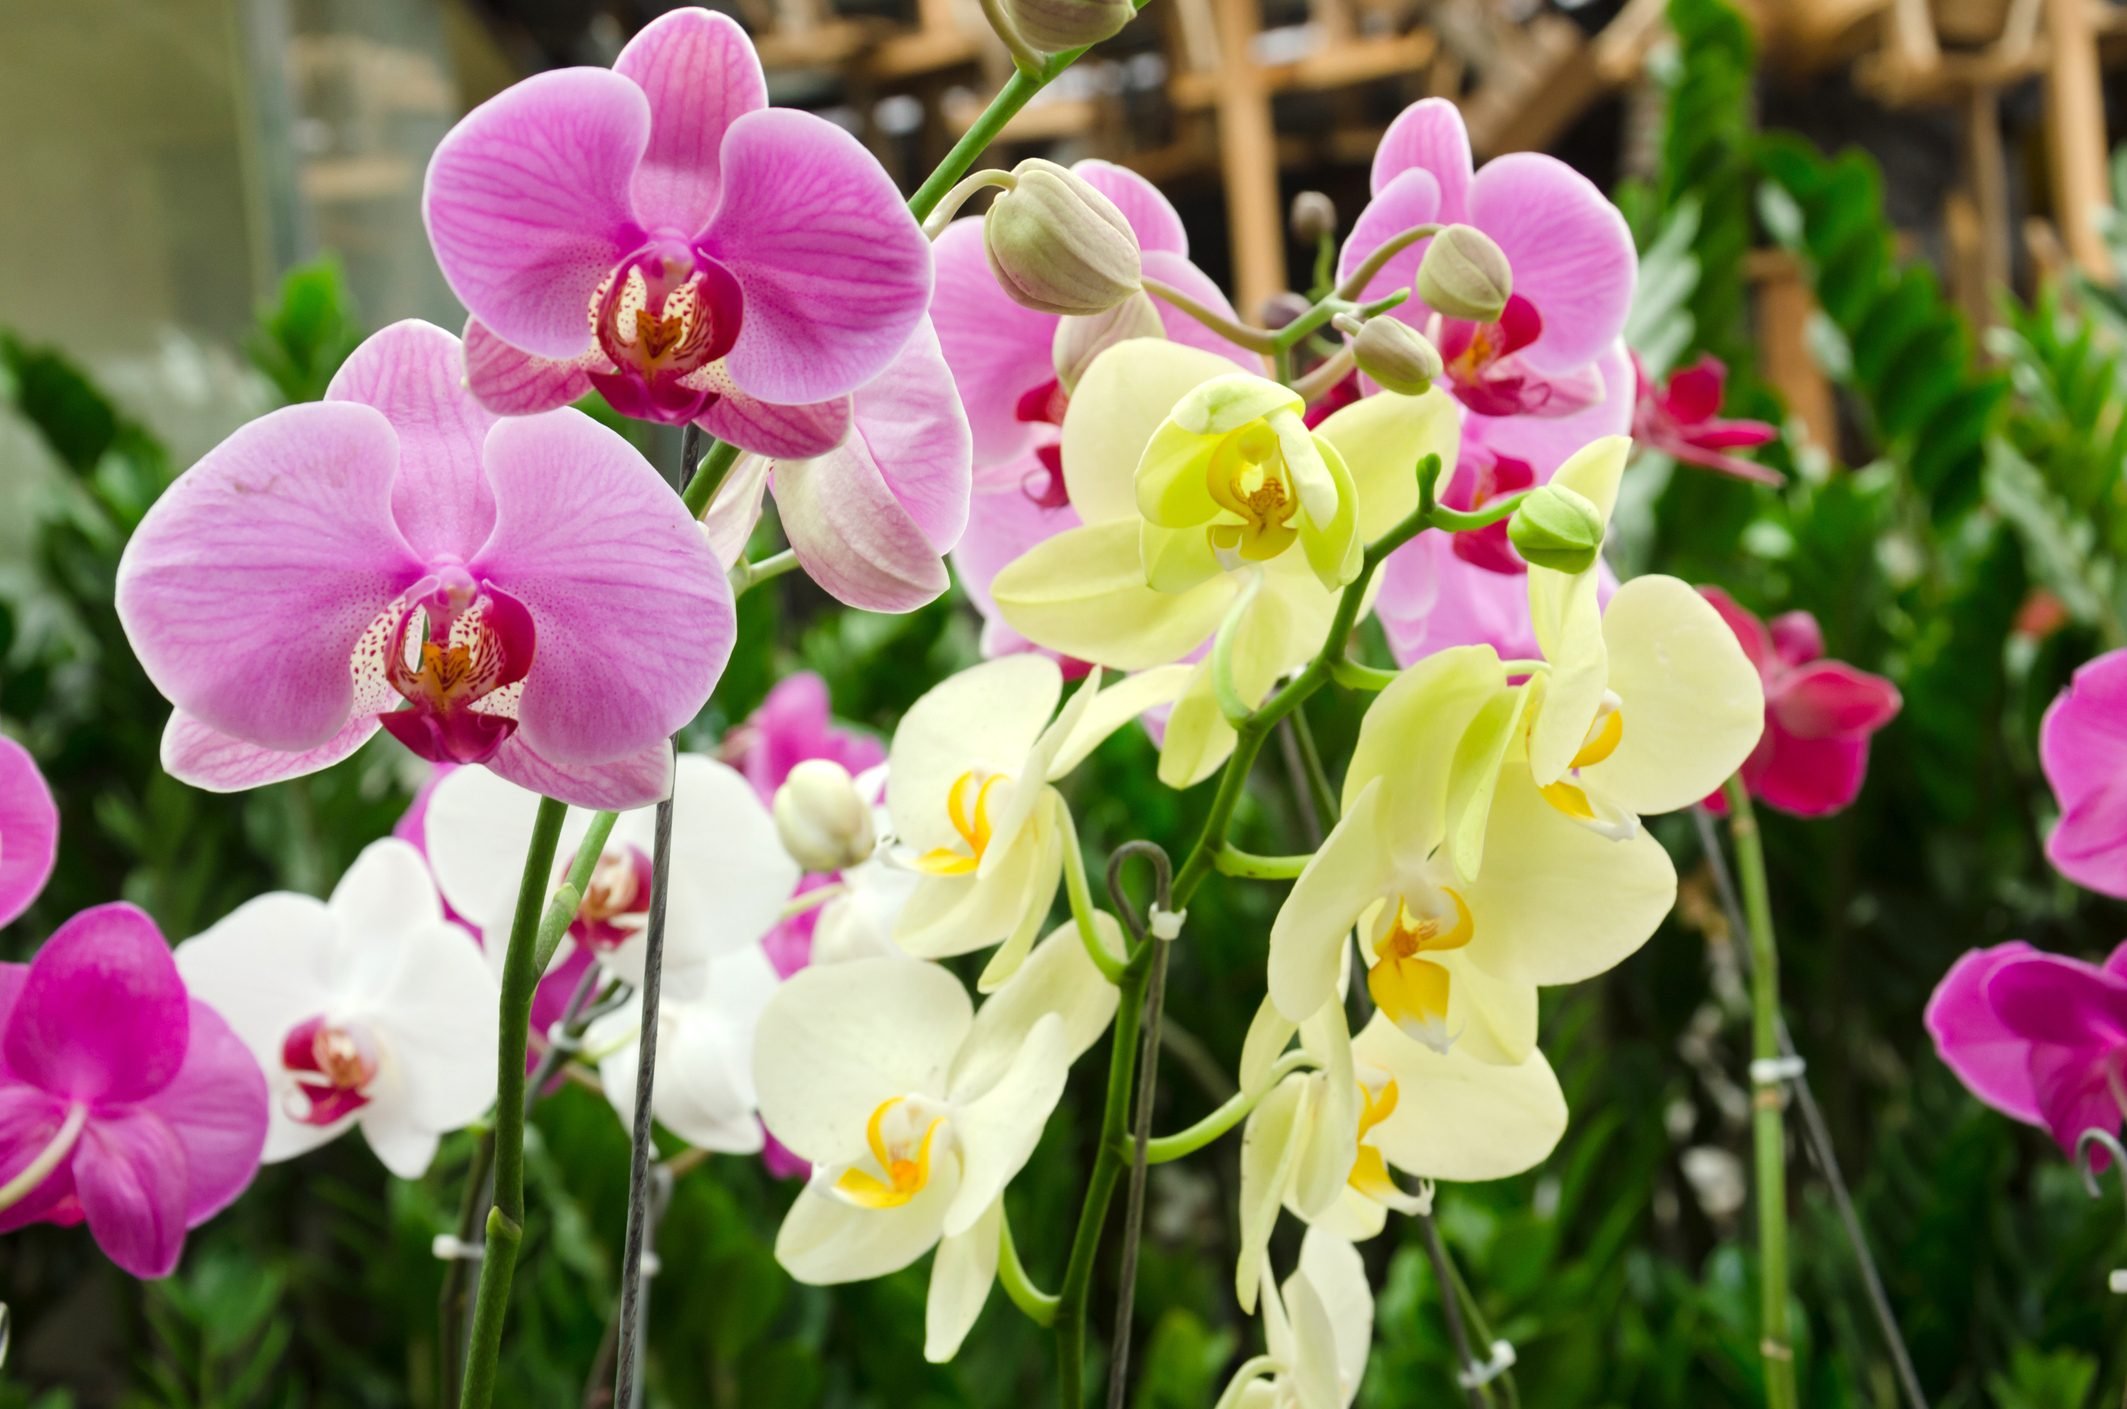 How to Grow and Care for Phalaenopsis Orchids